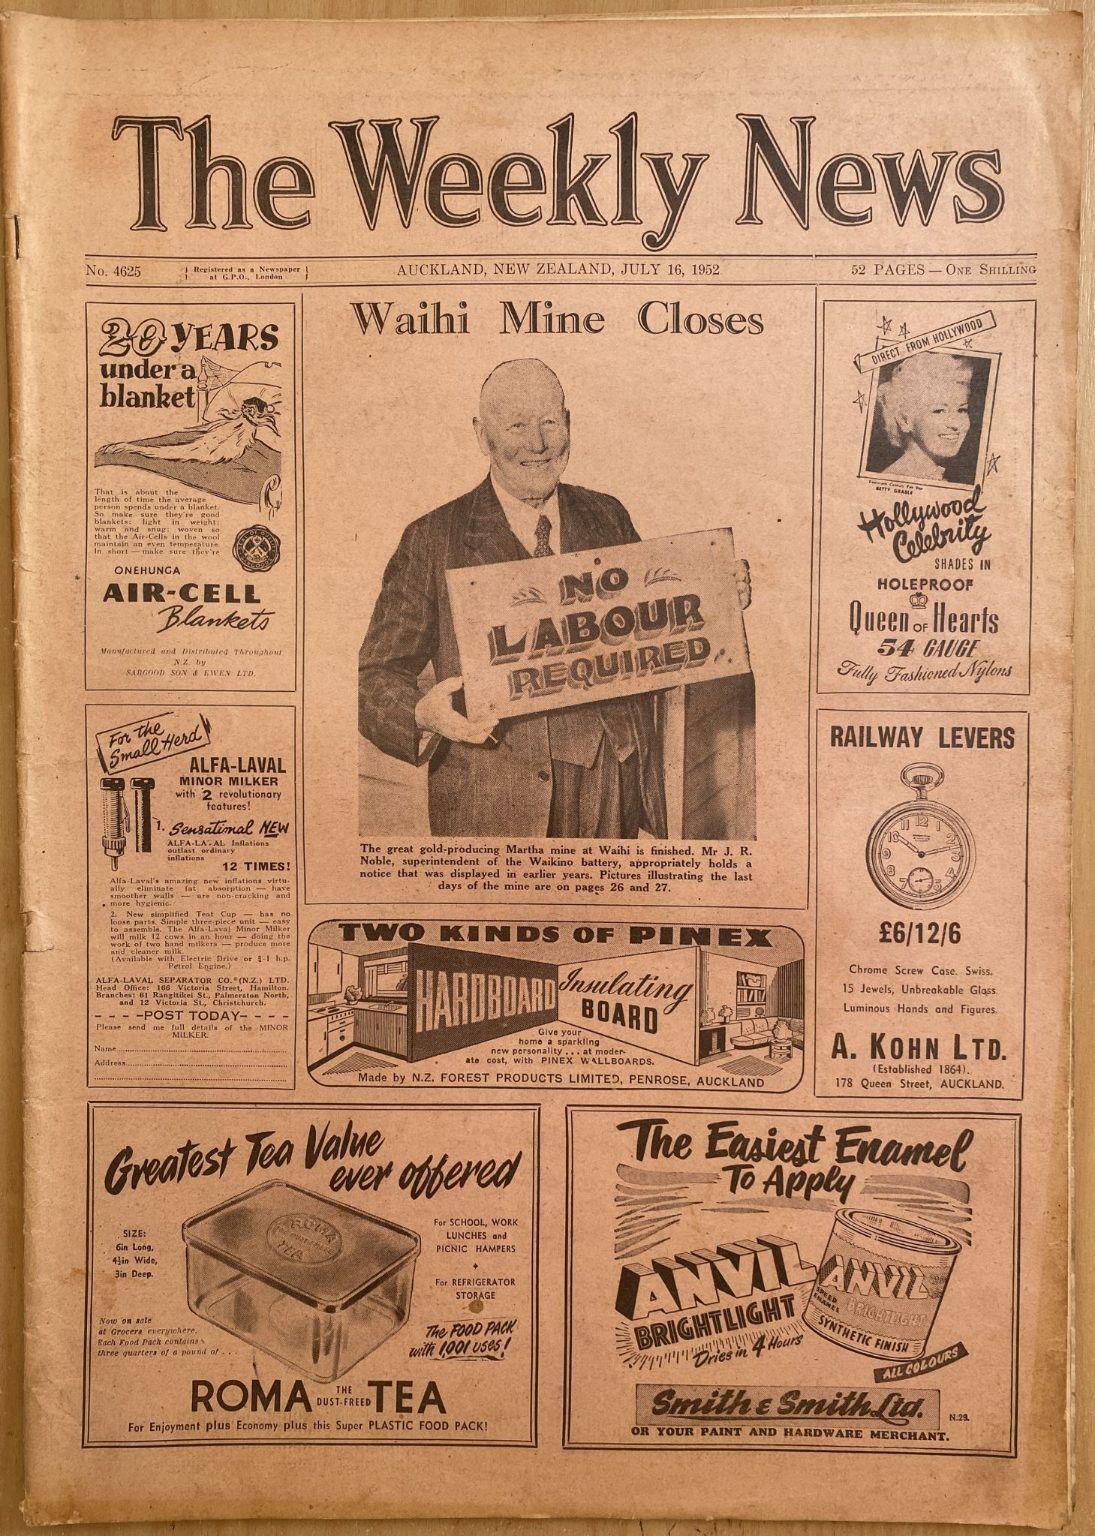 OLD NEWSPAPER: The Weekly News - No. 4625, 16 July 1952